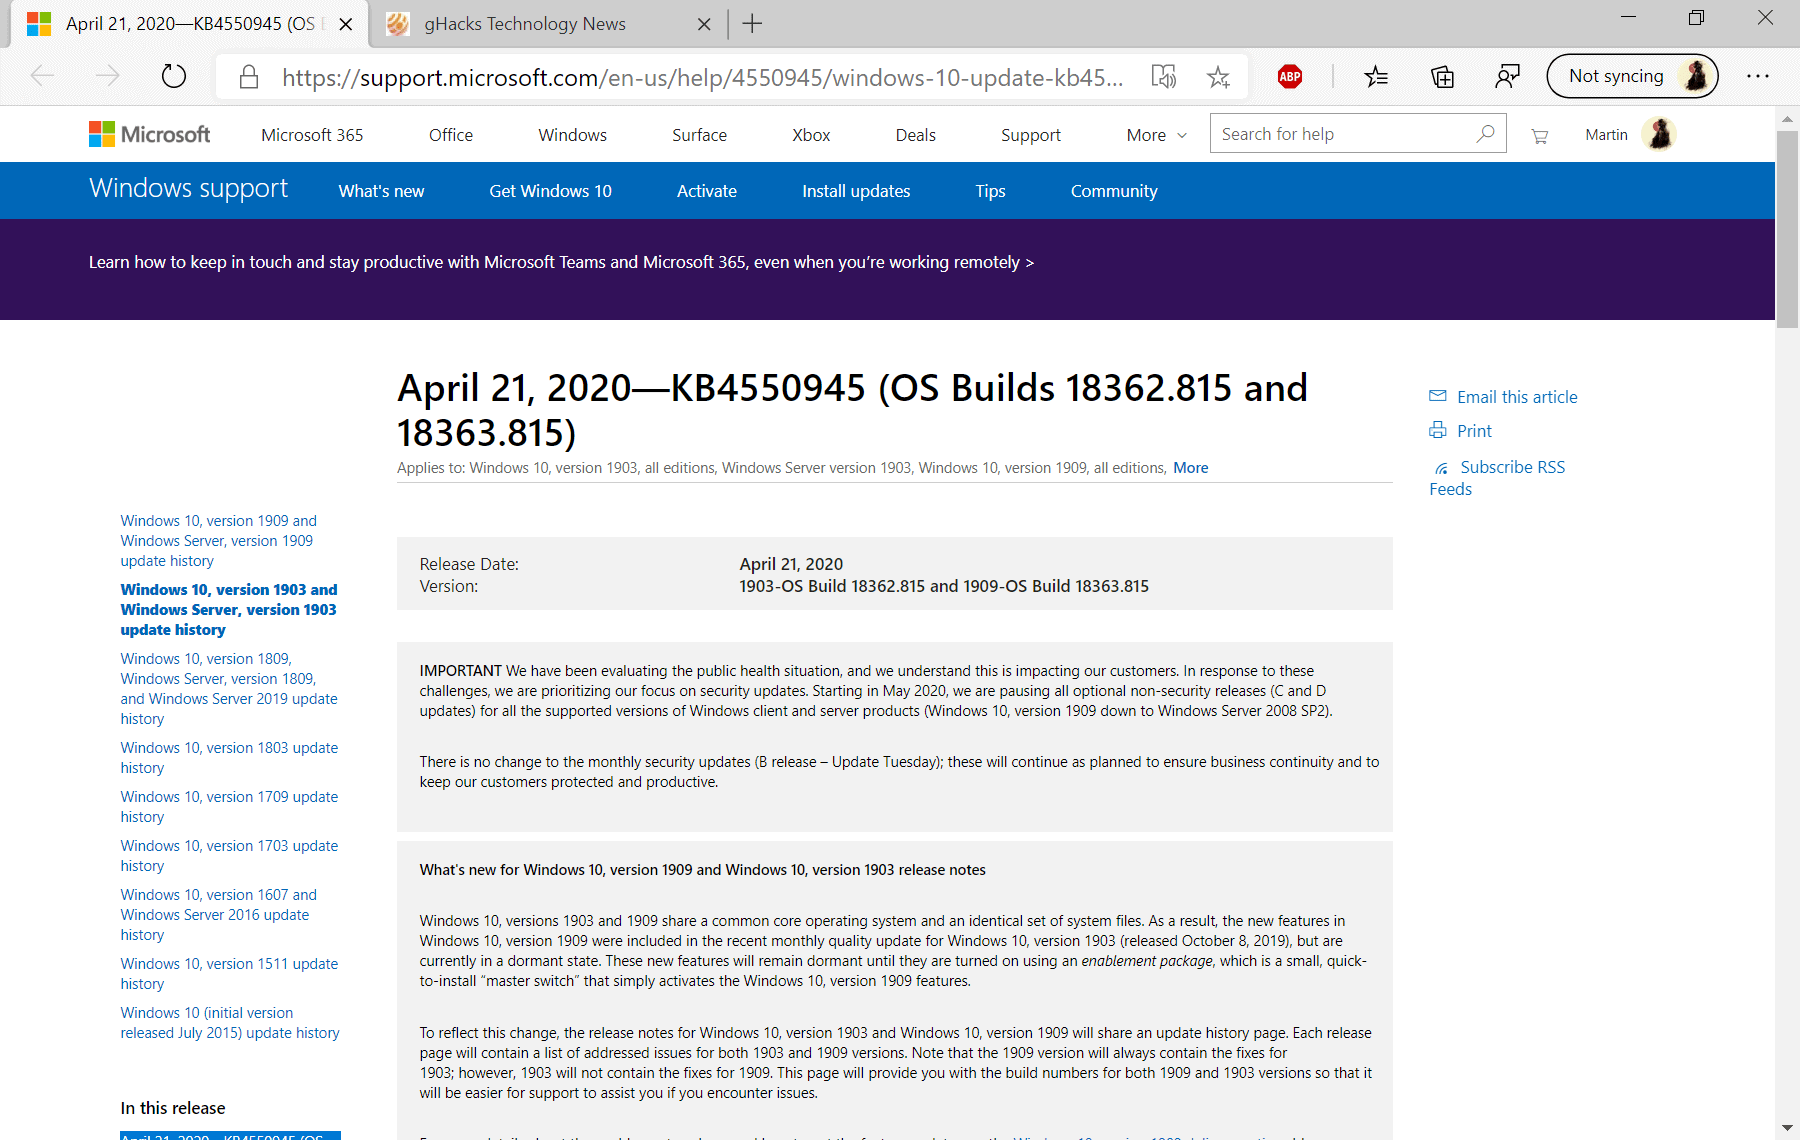 Microsoft releases KB4550945 for Windows 10 version 1903 and 1909